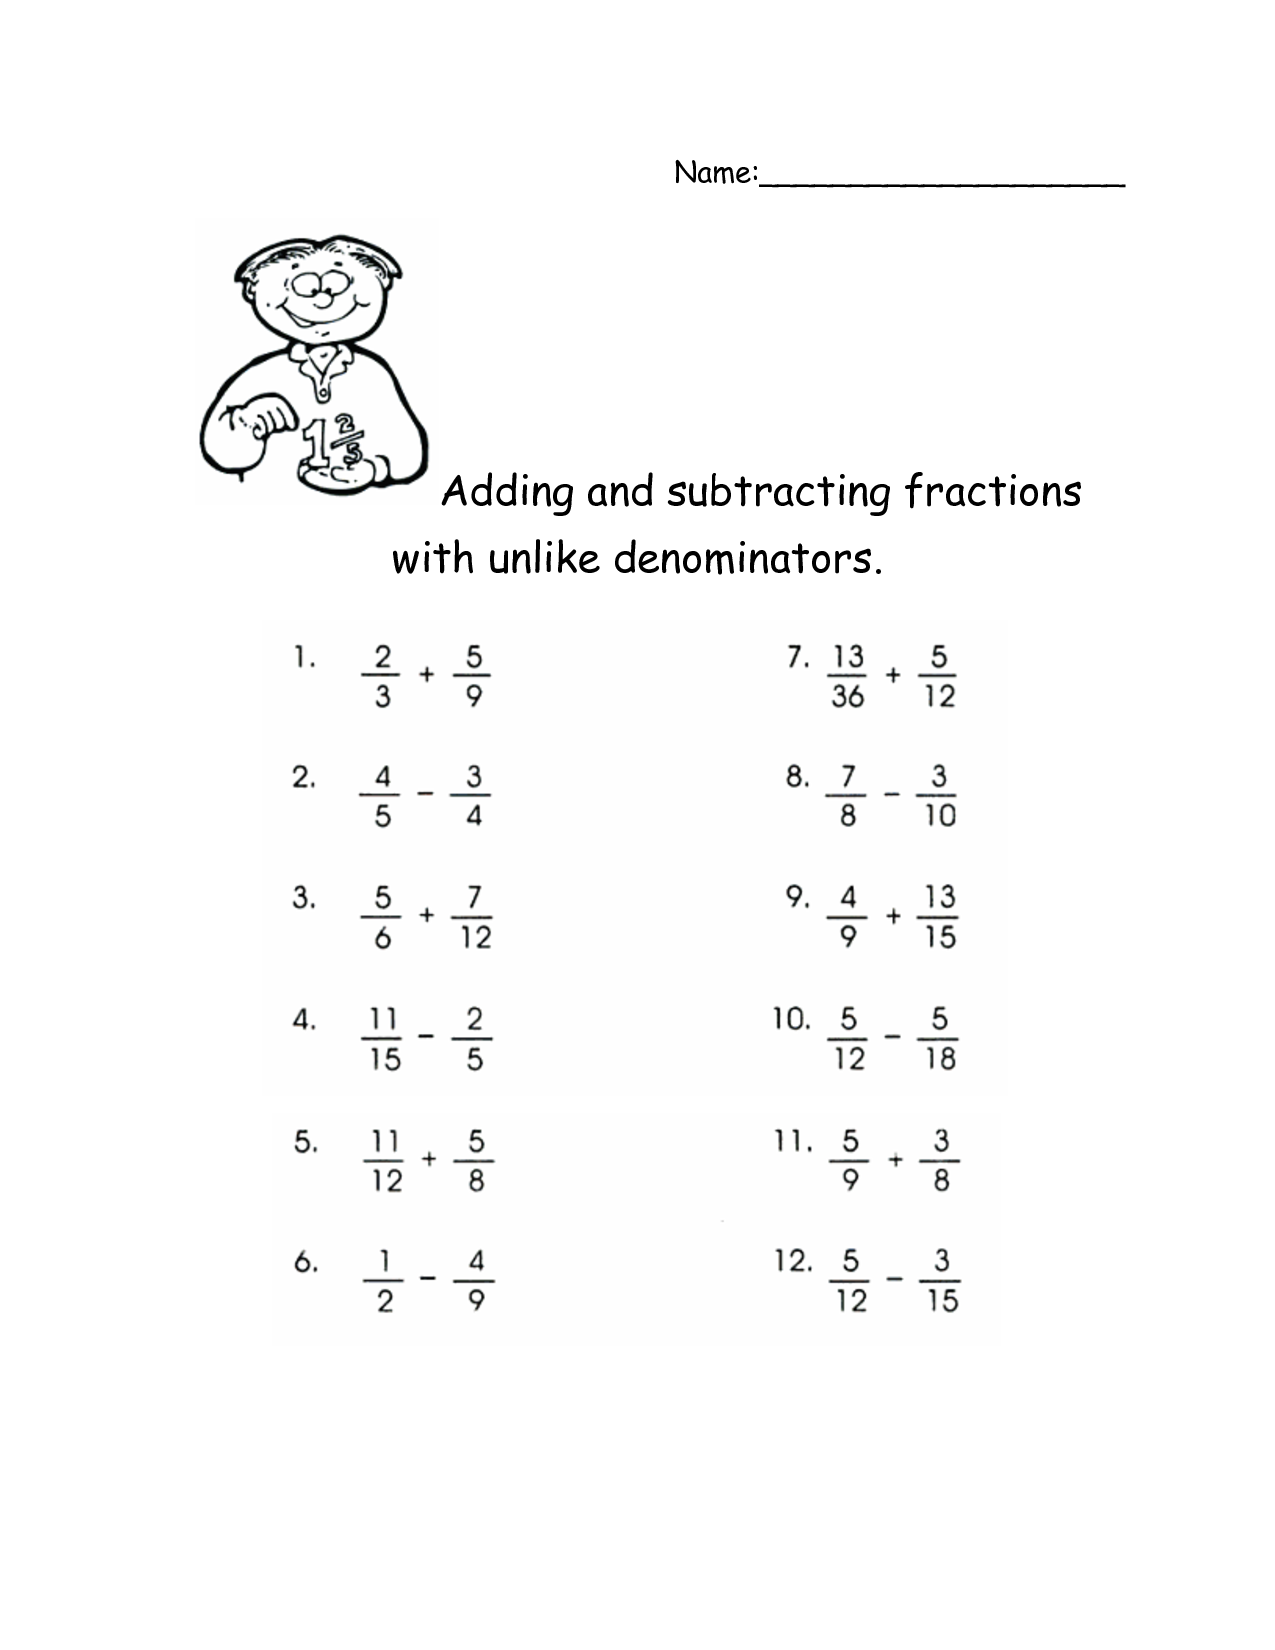 dividing-and-multiplying-fractions-worksheet-yahoo-image-search-results-fractions-worksheets